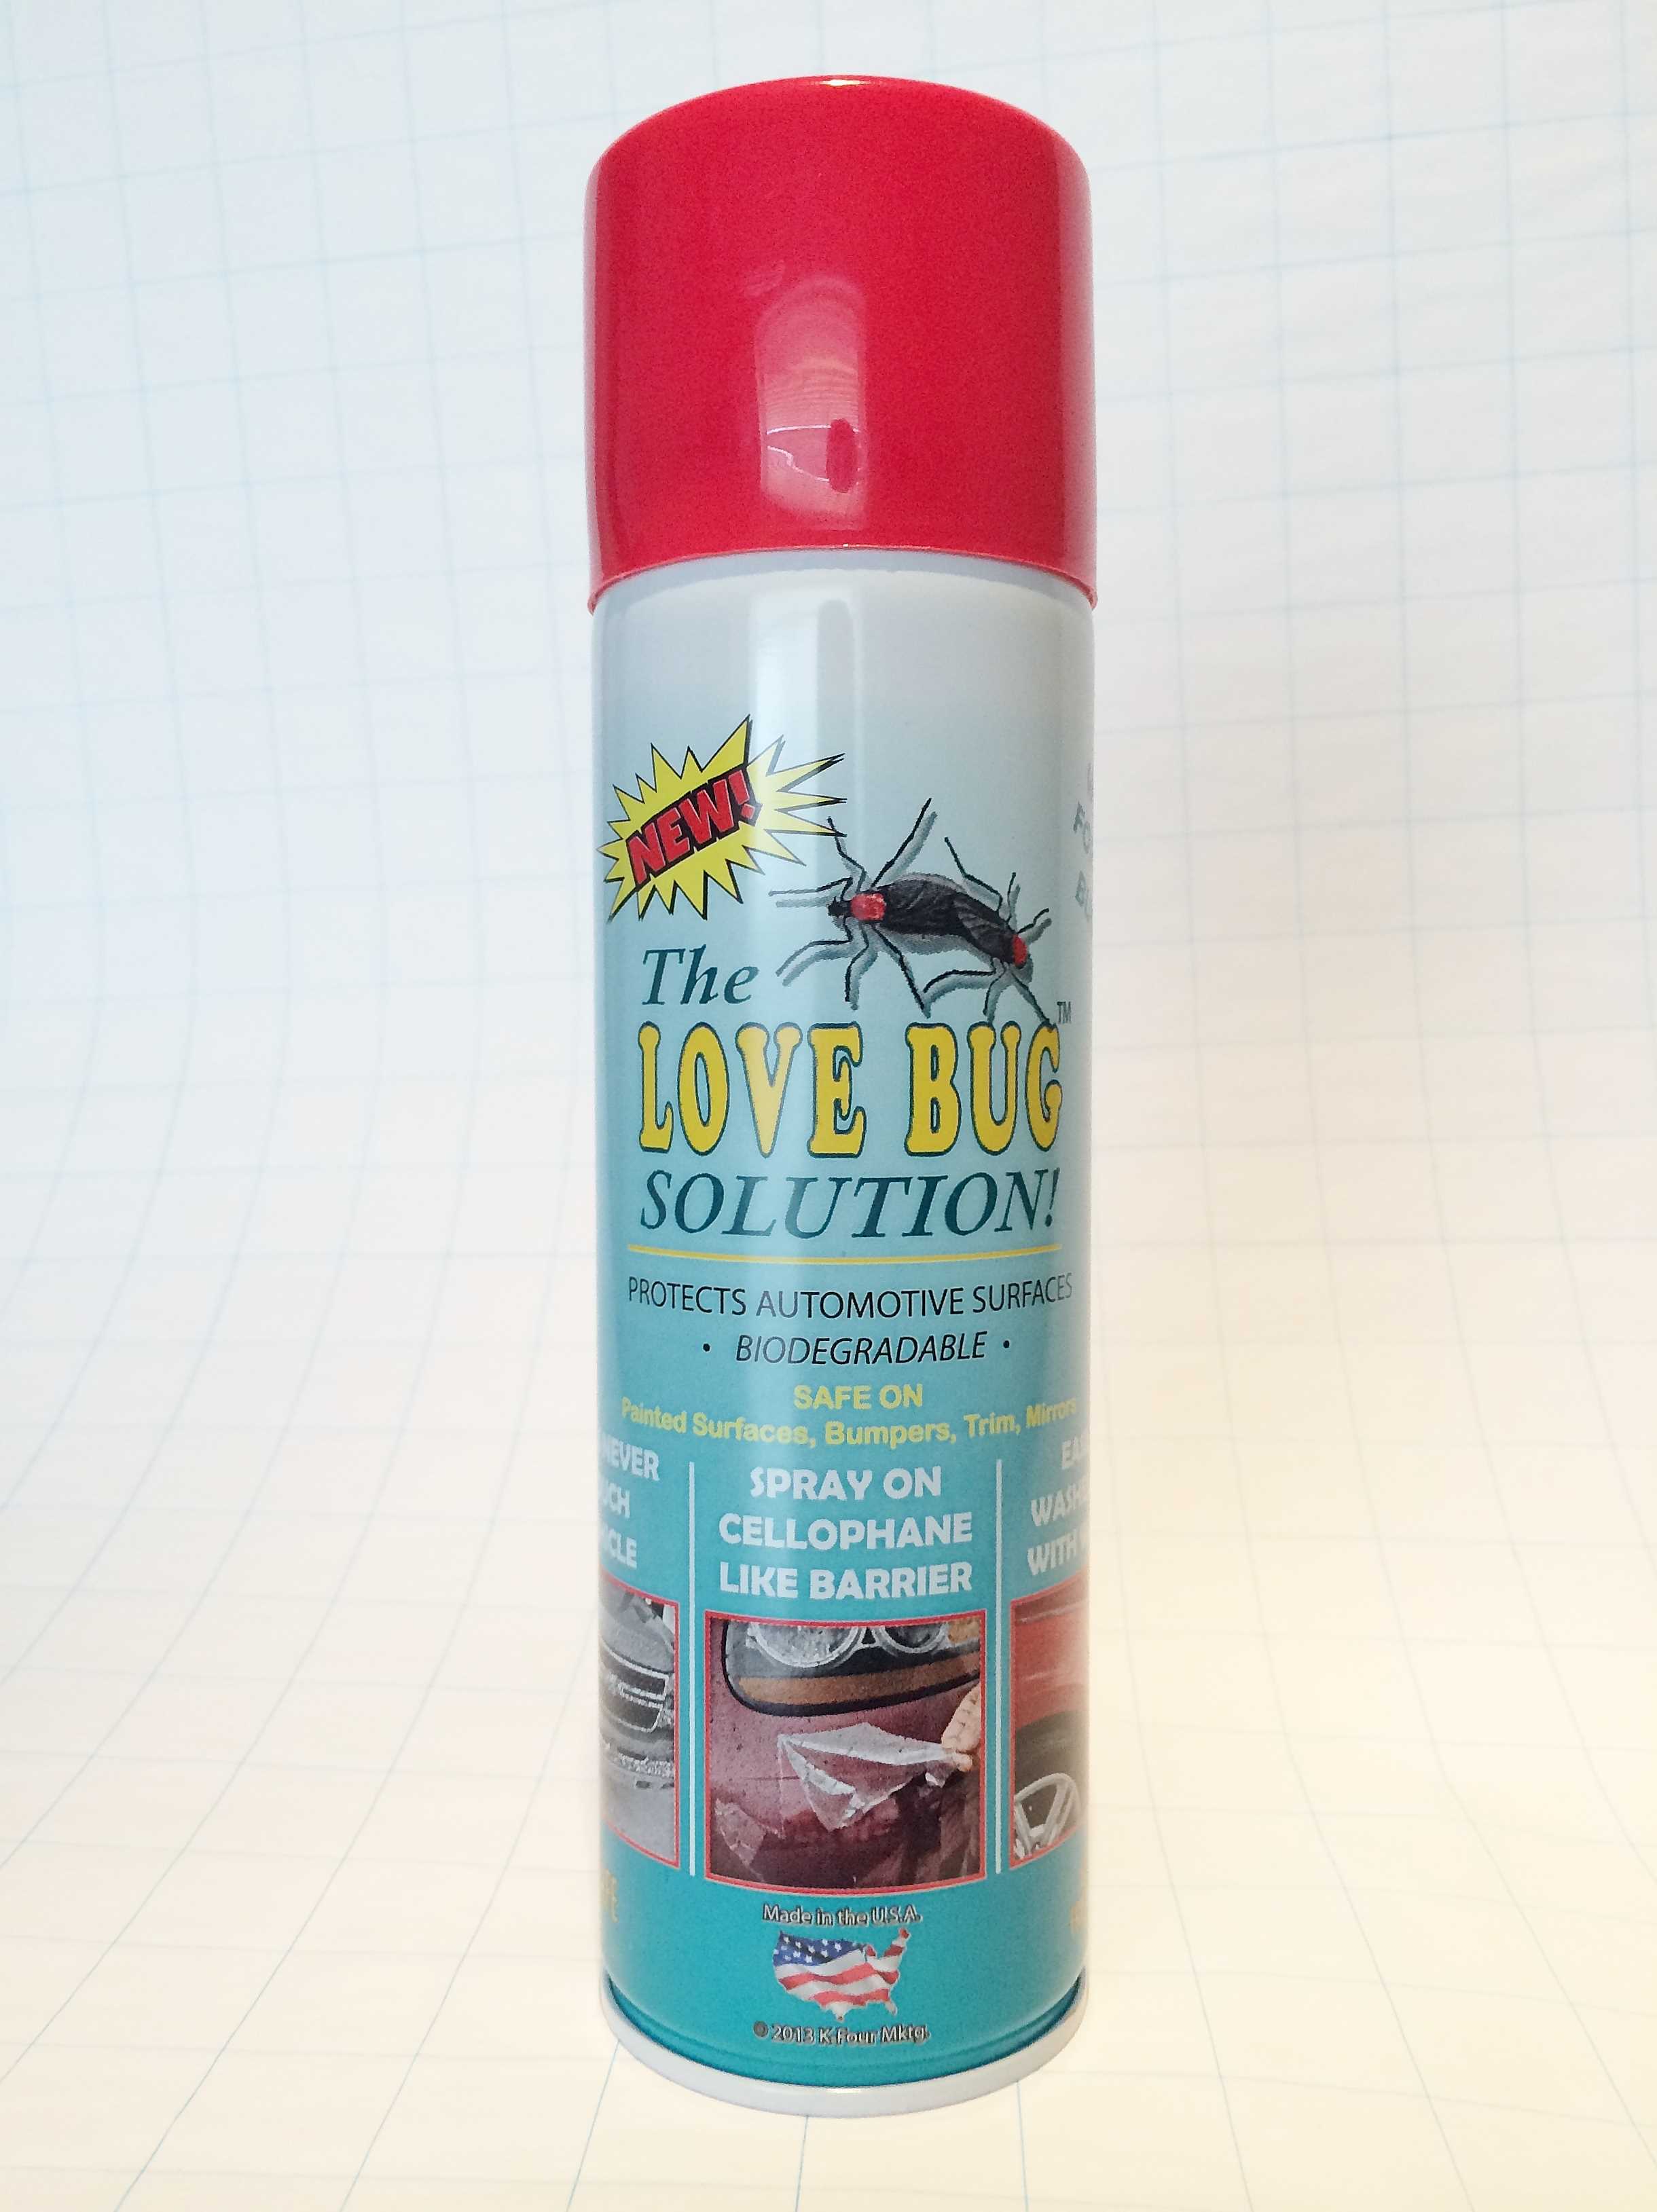 The Love Bug Solution is now available in a convenient aerosol can